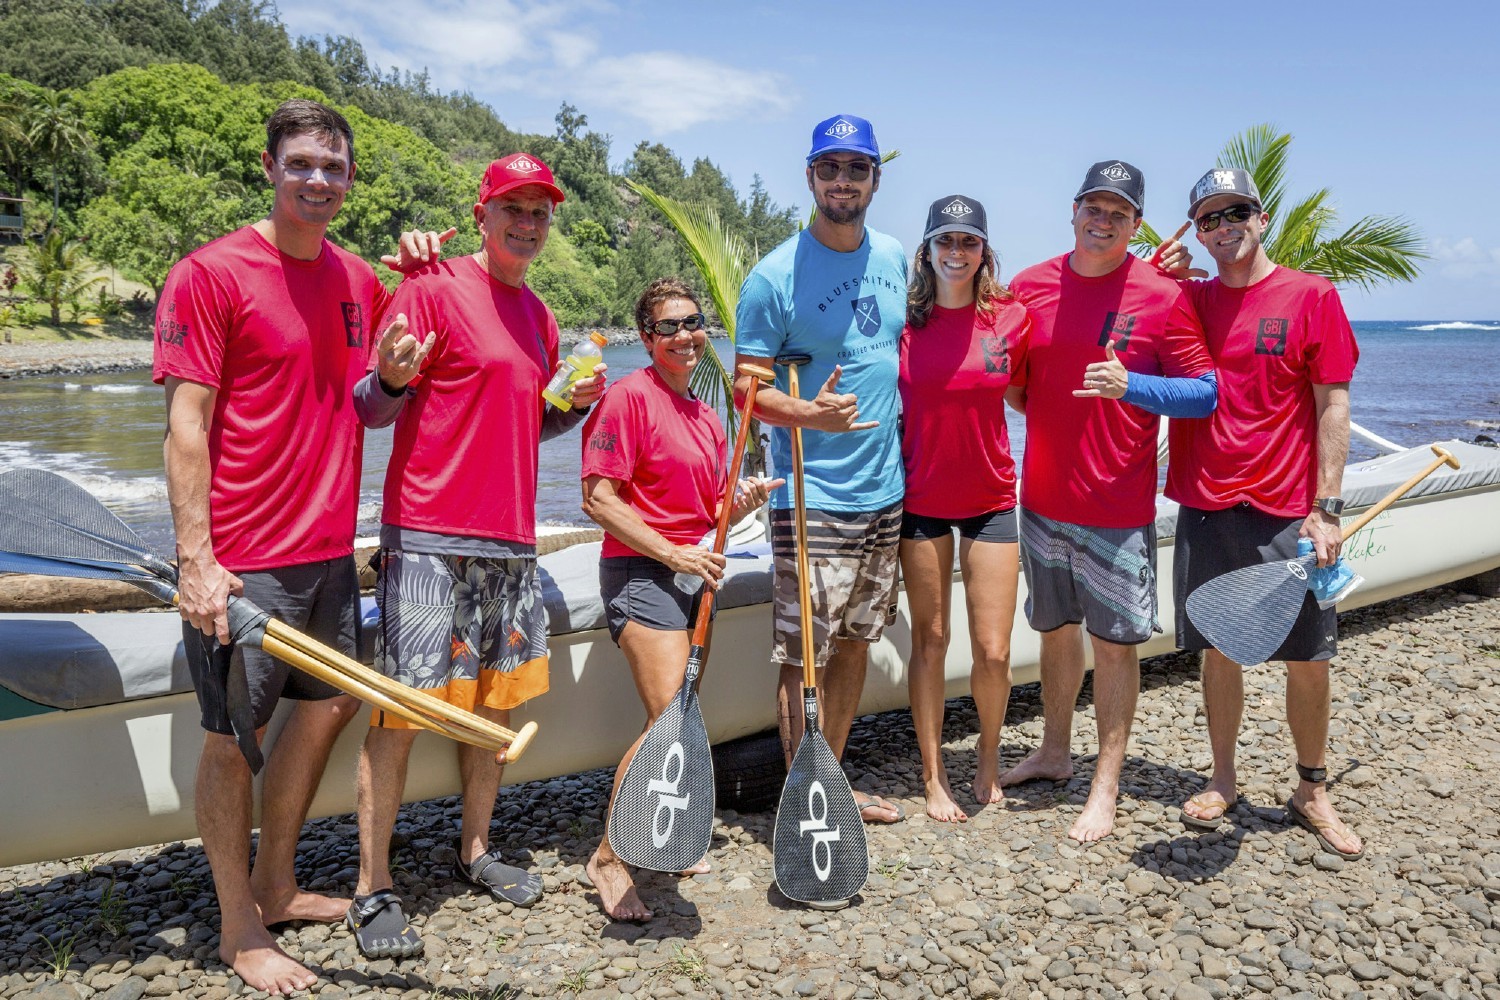 GBI employees participate in a charity paddling event